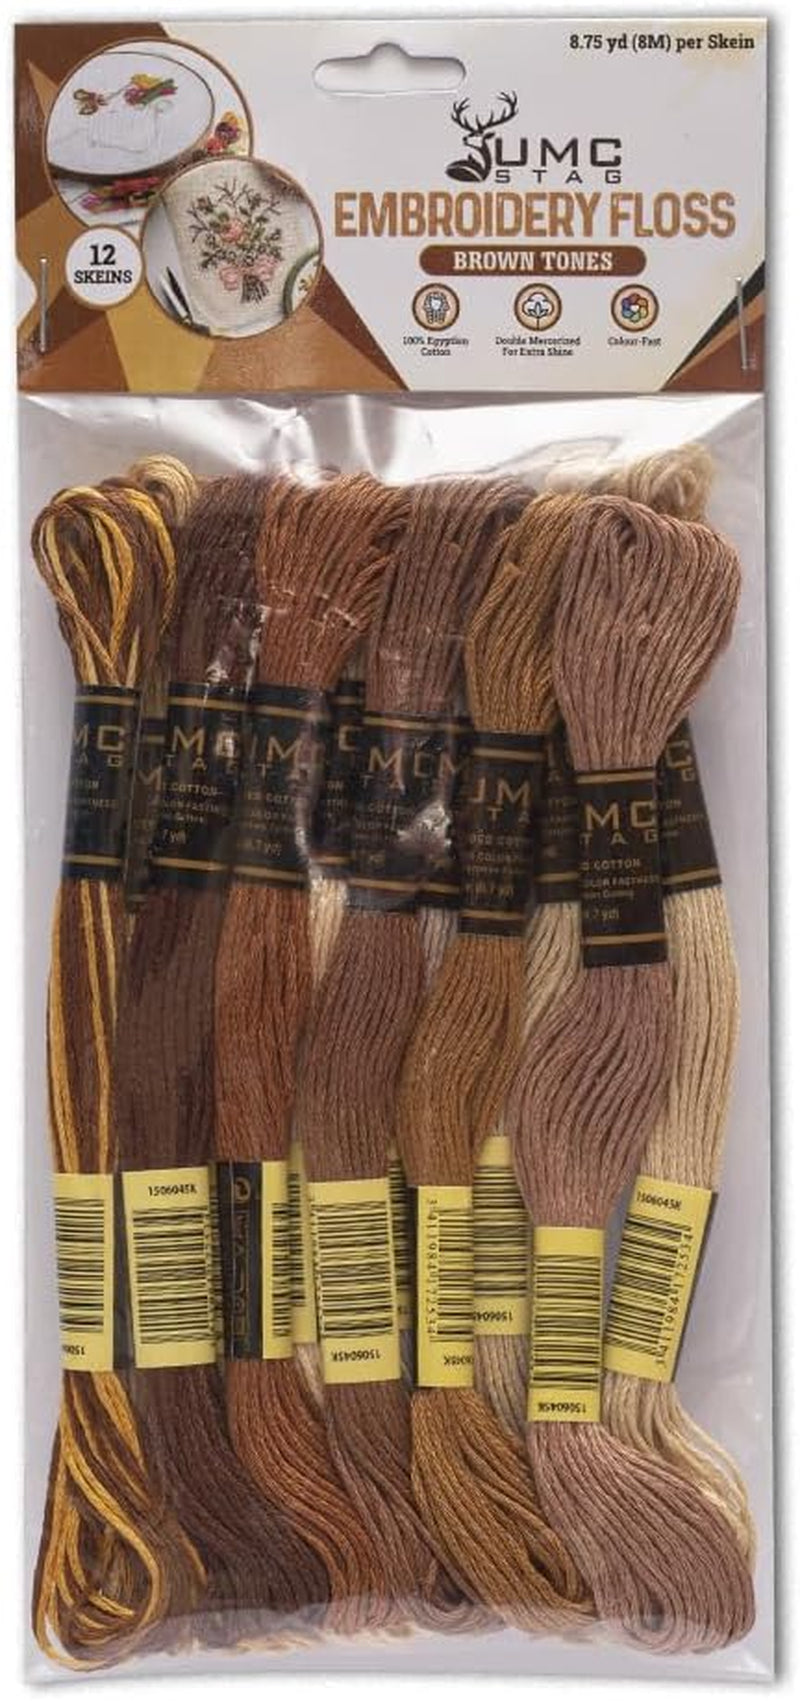 12 Pieces | Premium Embroidery Thread | 100% Egyptian Cotton Premium Skeins | Cross Stitch Embroidery Floss | Oeko TEX Certified Stranded Cotton (Brown Tones)